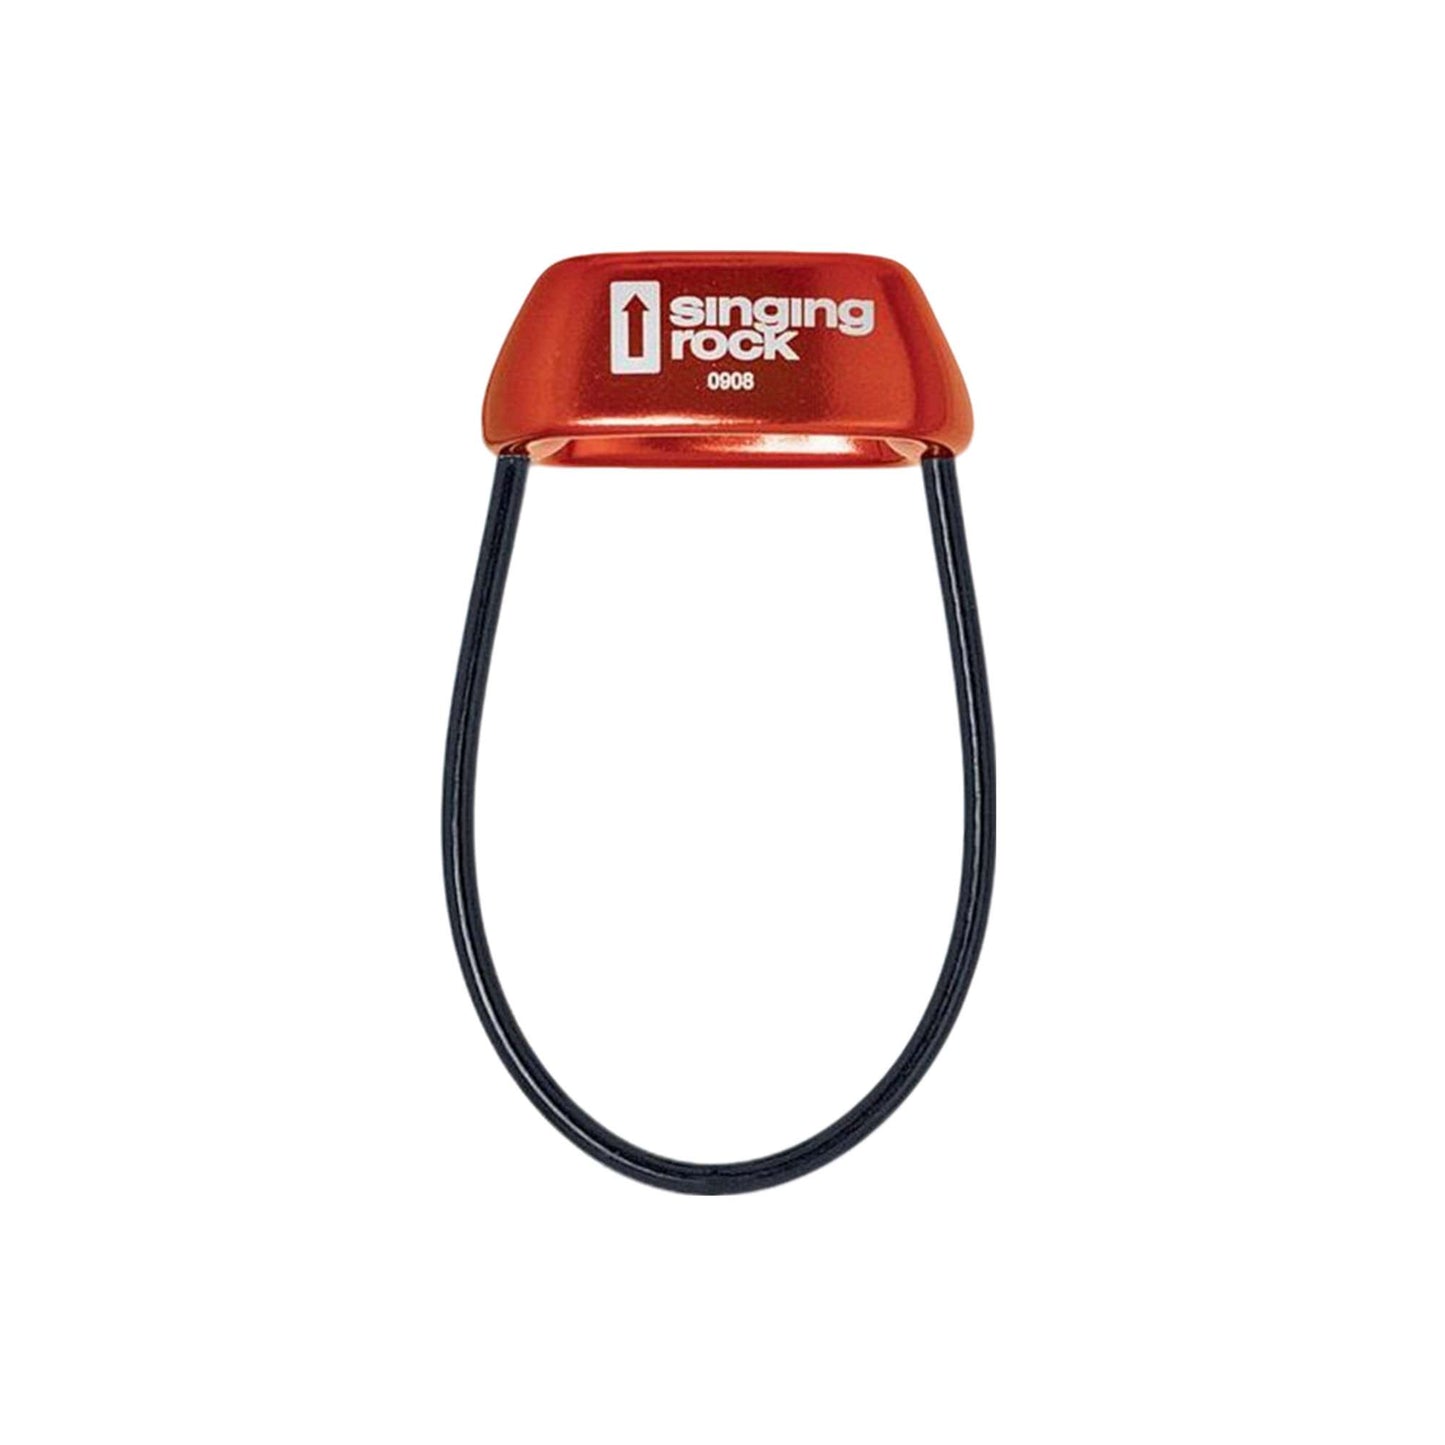 Buddy Belay Device - Lightweight & Heat Dissipating for Smooth Belaying